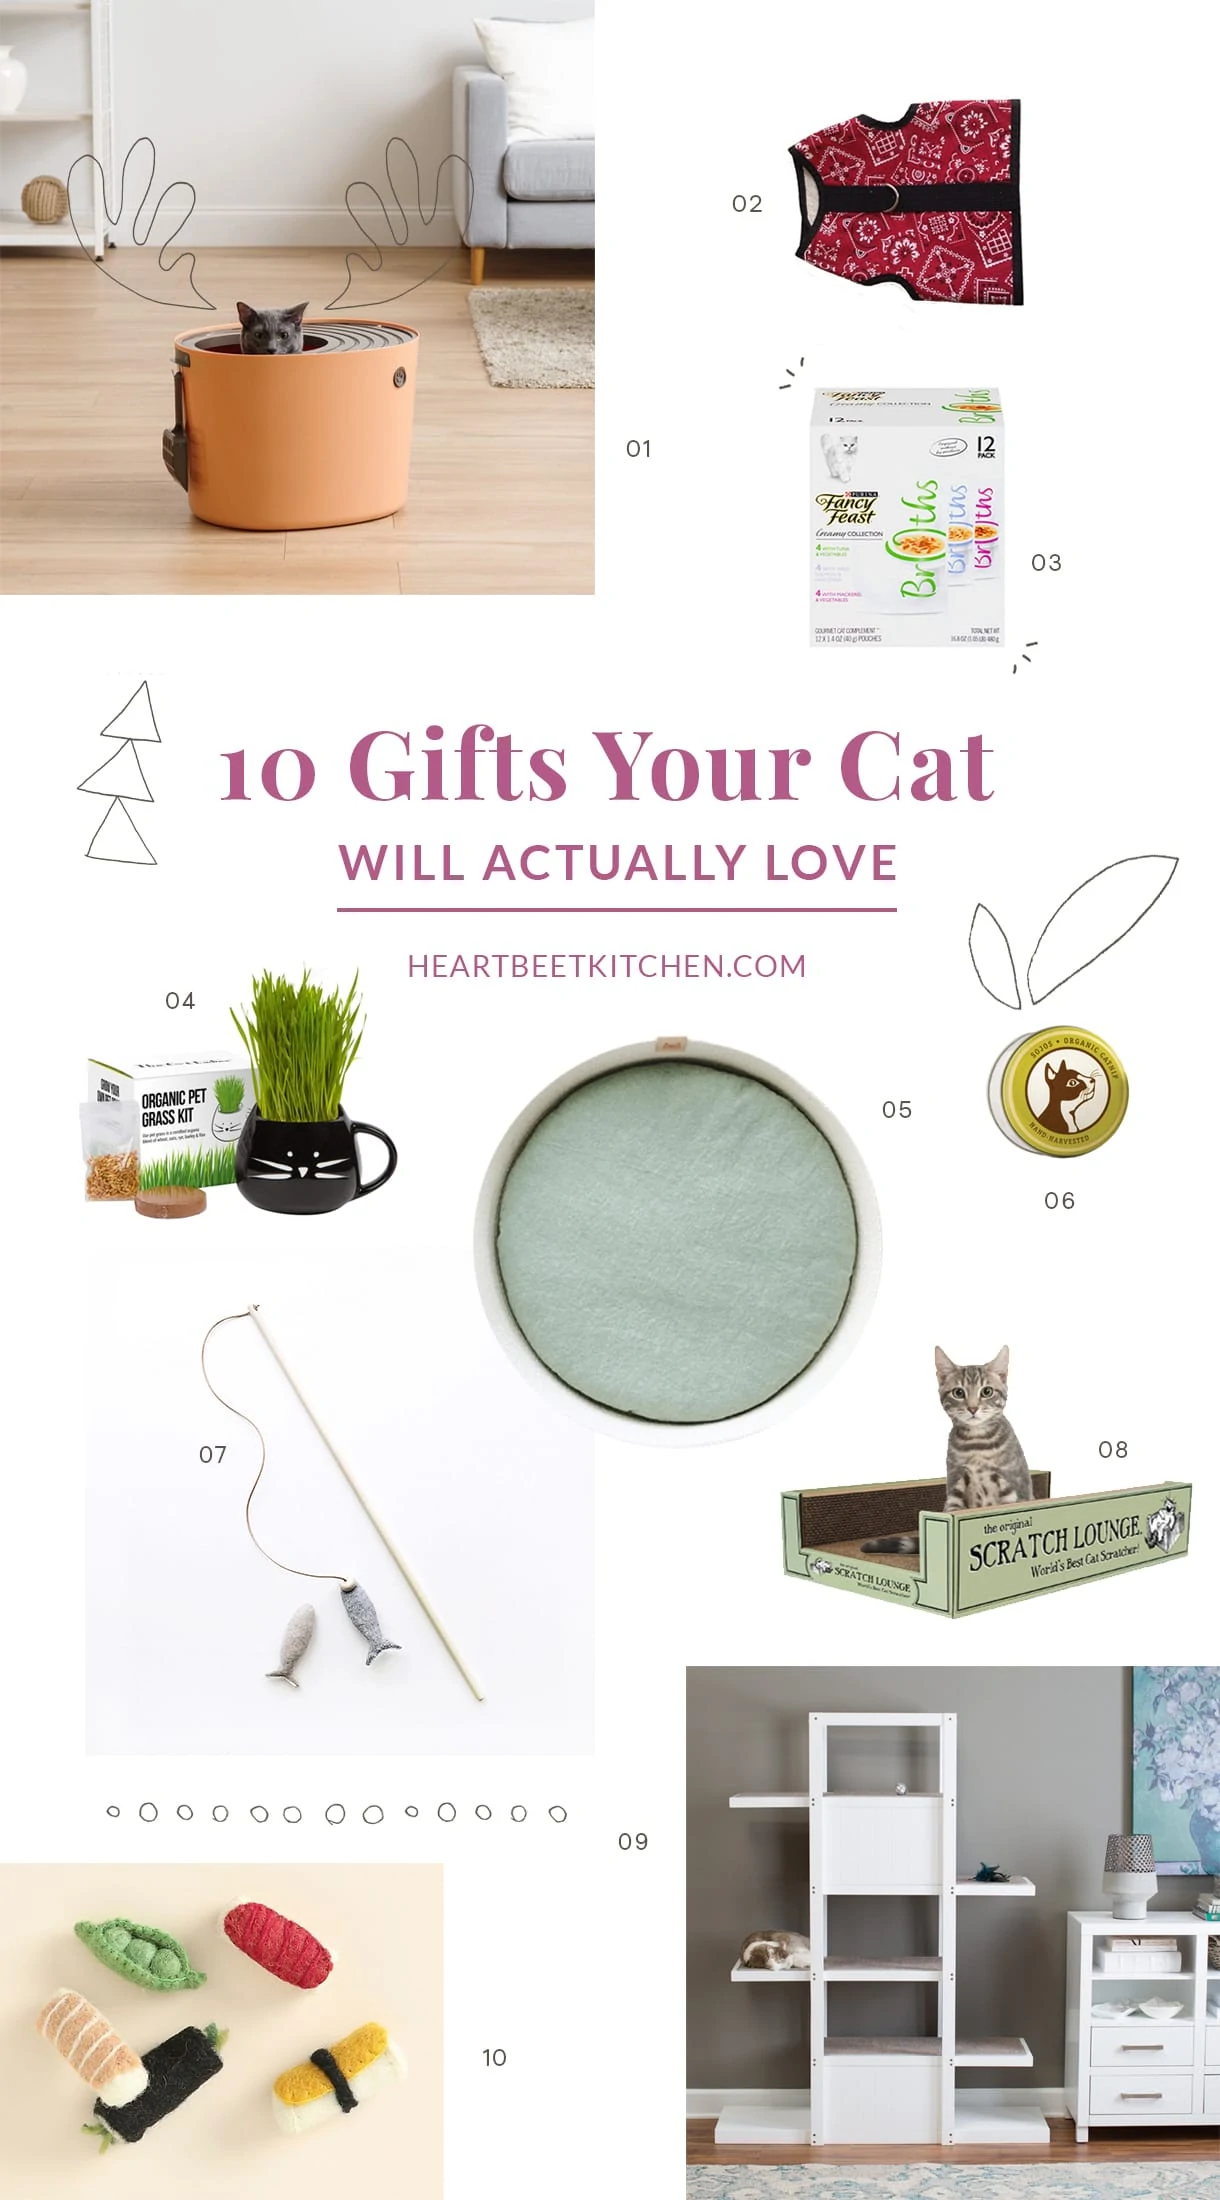 Top 10 Gifts For Cats, Gifts Your Cat will Actually Love